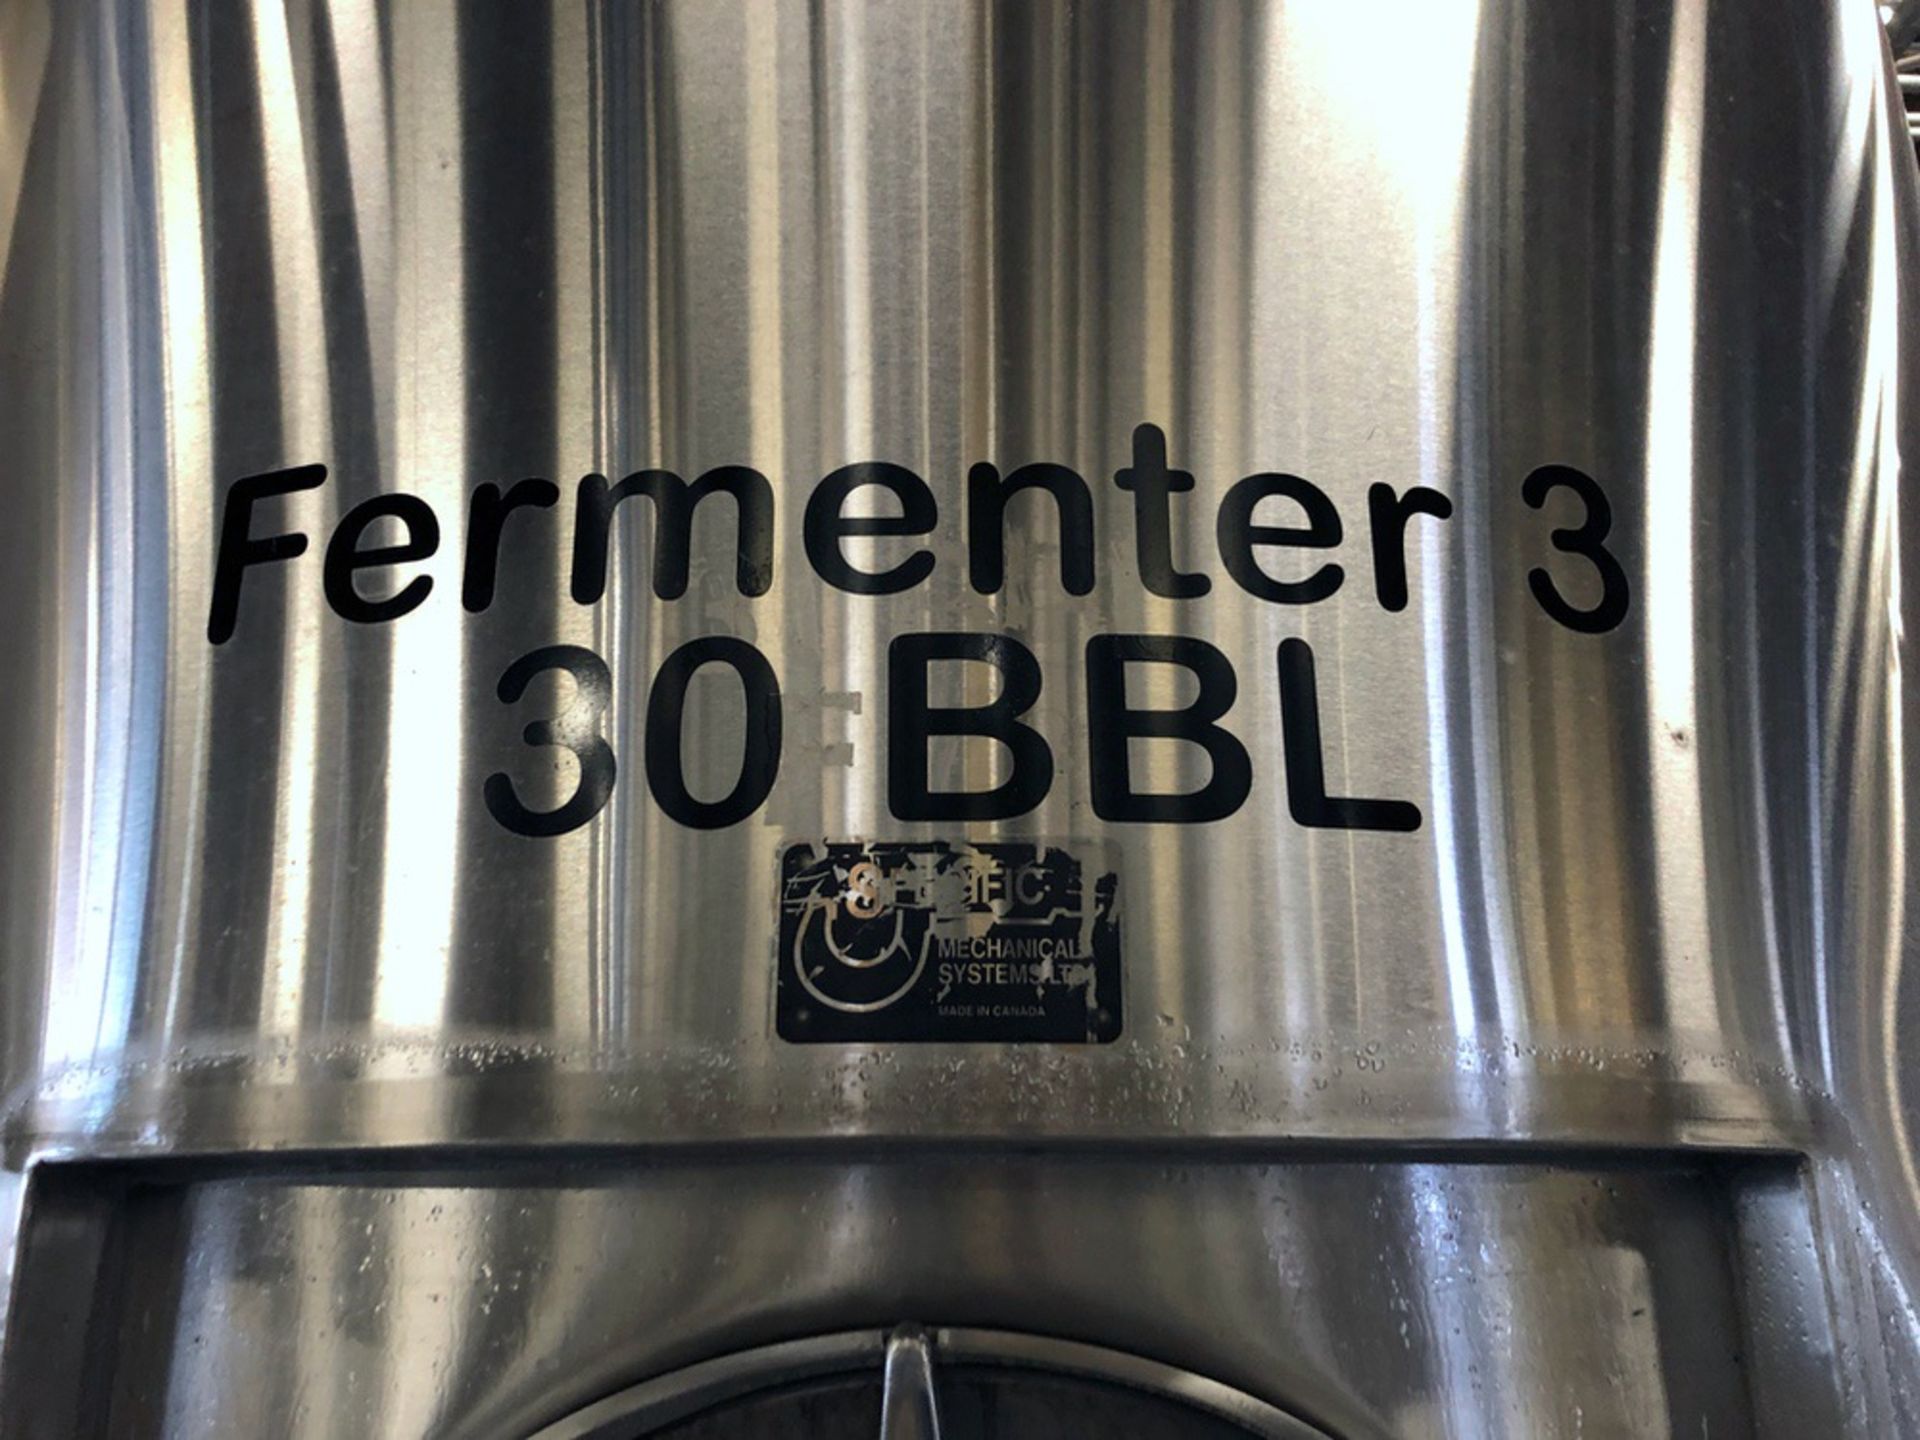 Specific Mechanical 30 BBL Fermenter, Glycol Jacketed, Approx Dims: - Subj to Bulk | Rig Fee: $950 - Image 4 of 7